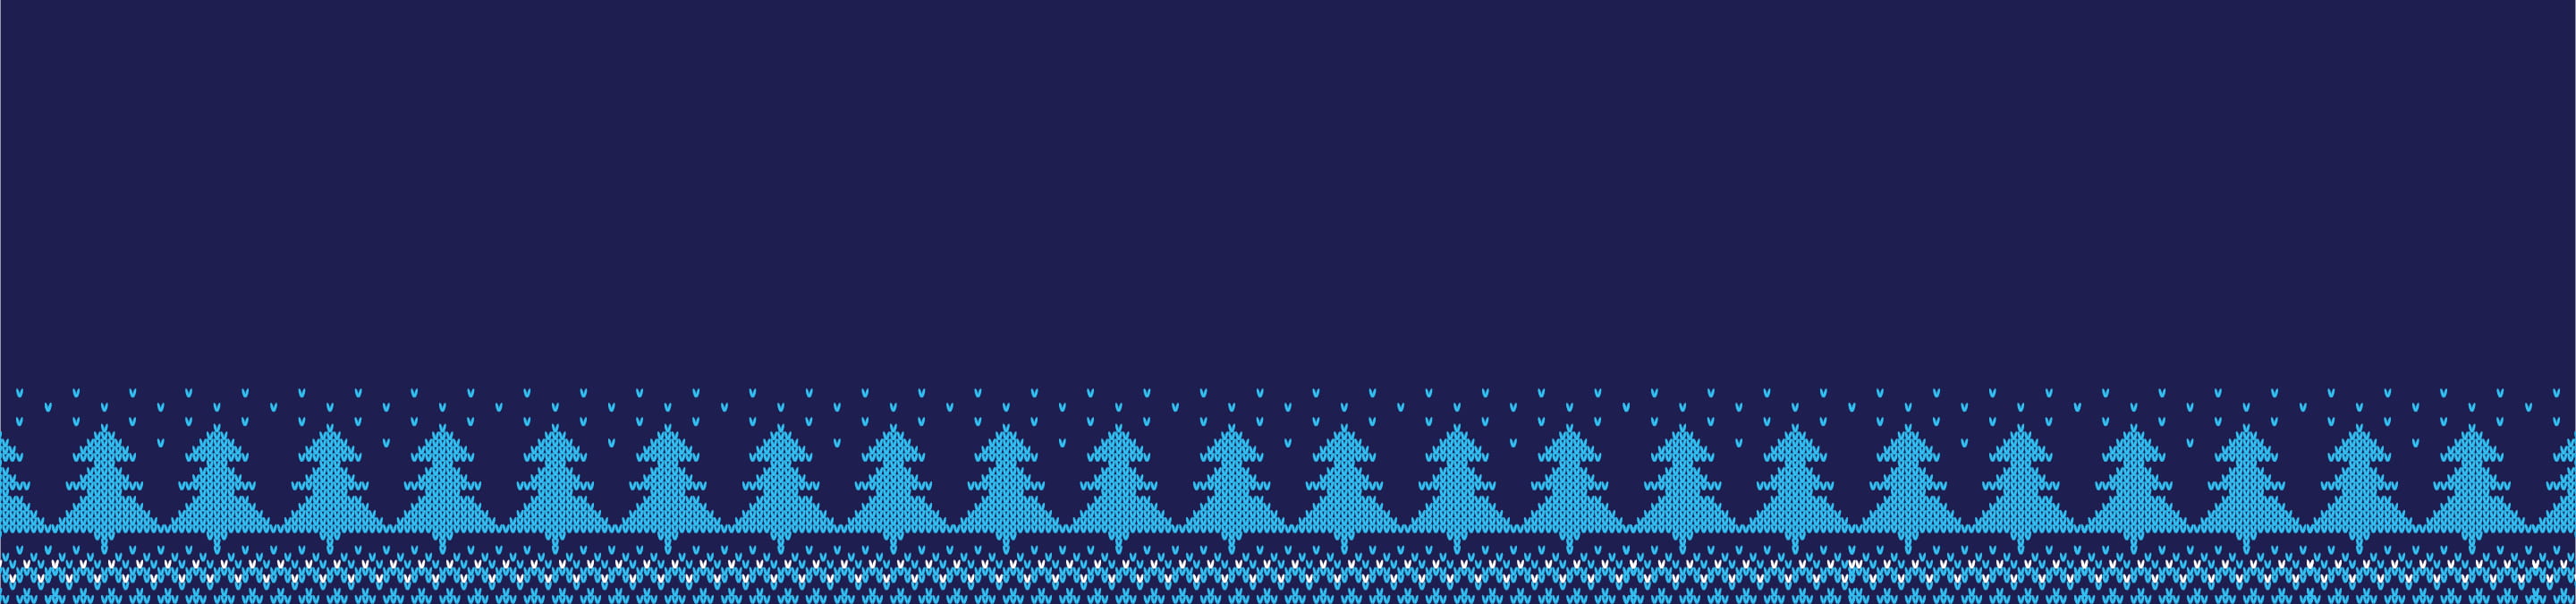 Christmas pattern with a line of Christmas trees along the bottom in light blue on a dark blue background